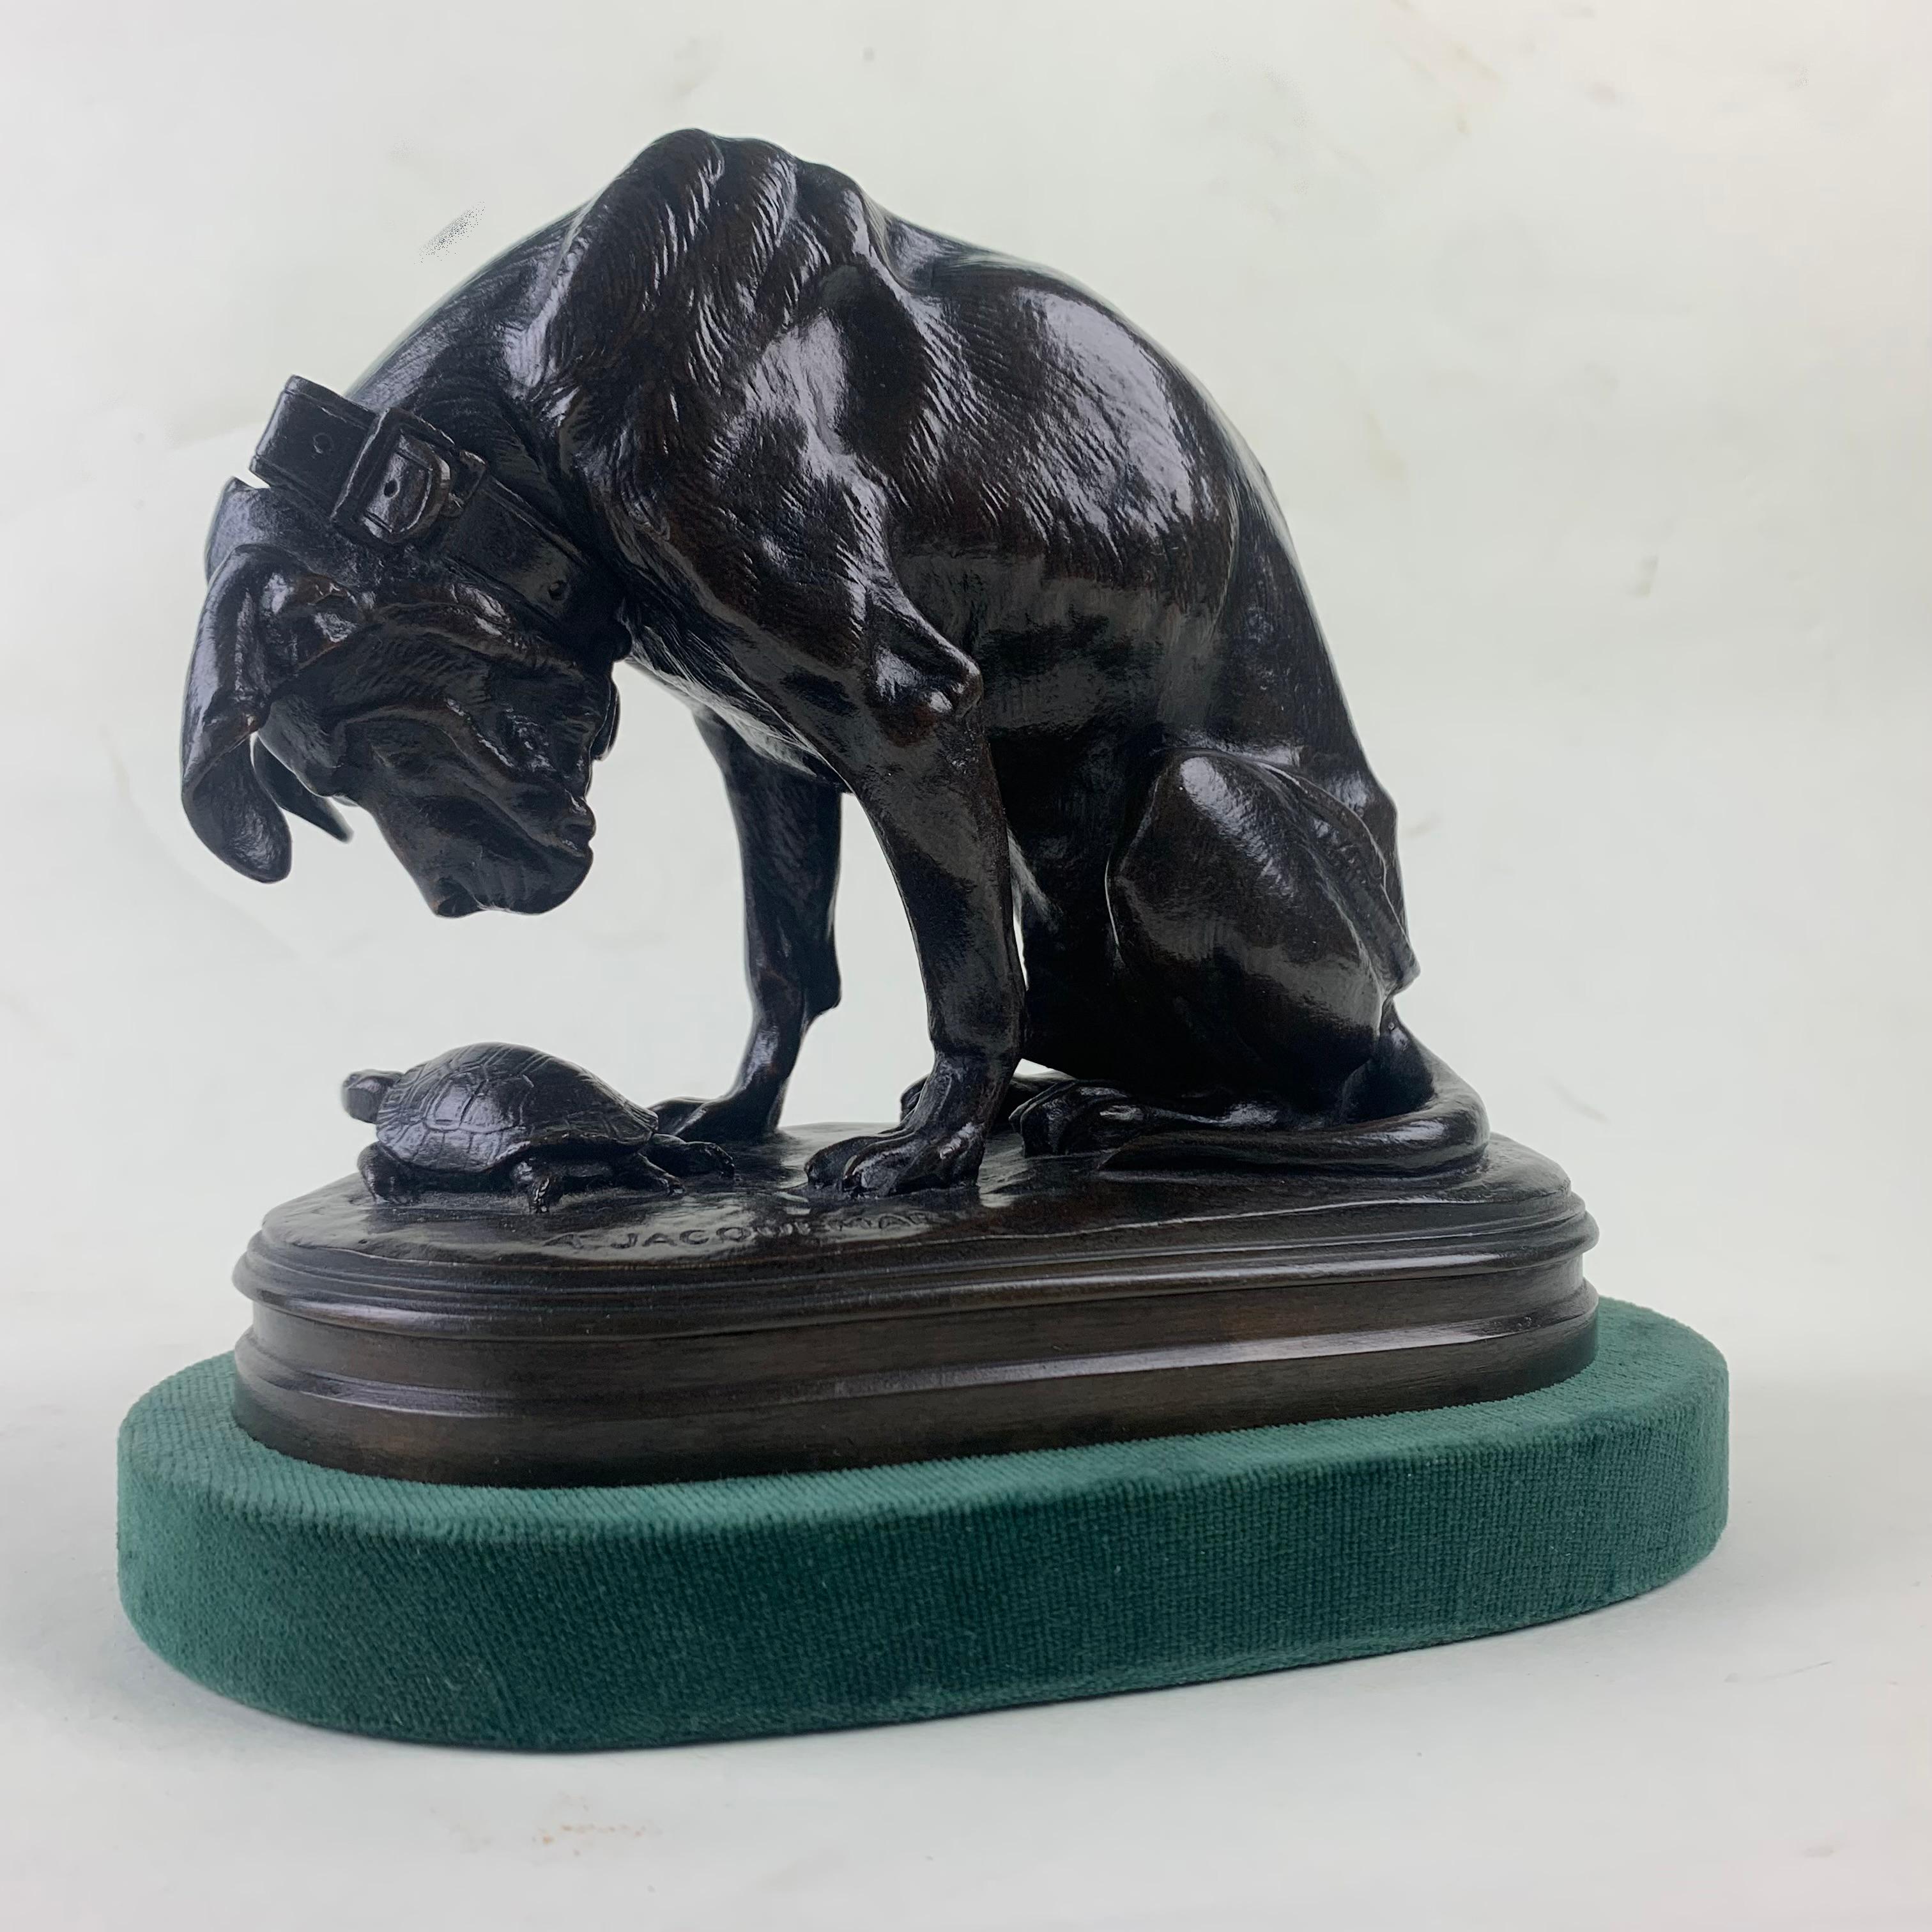 French bronze figure of a dog and a tortoise by Alfred Jaquemart, signed to the base and stamped A.D. for the A. Delafontaine foundry. With excellent deep brown and rich patination.
Provenance:with Hickmott Fine Arts, London.